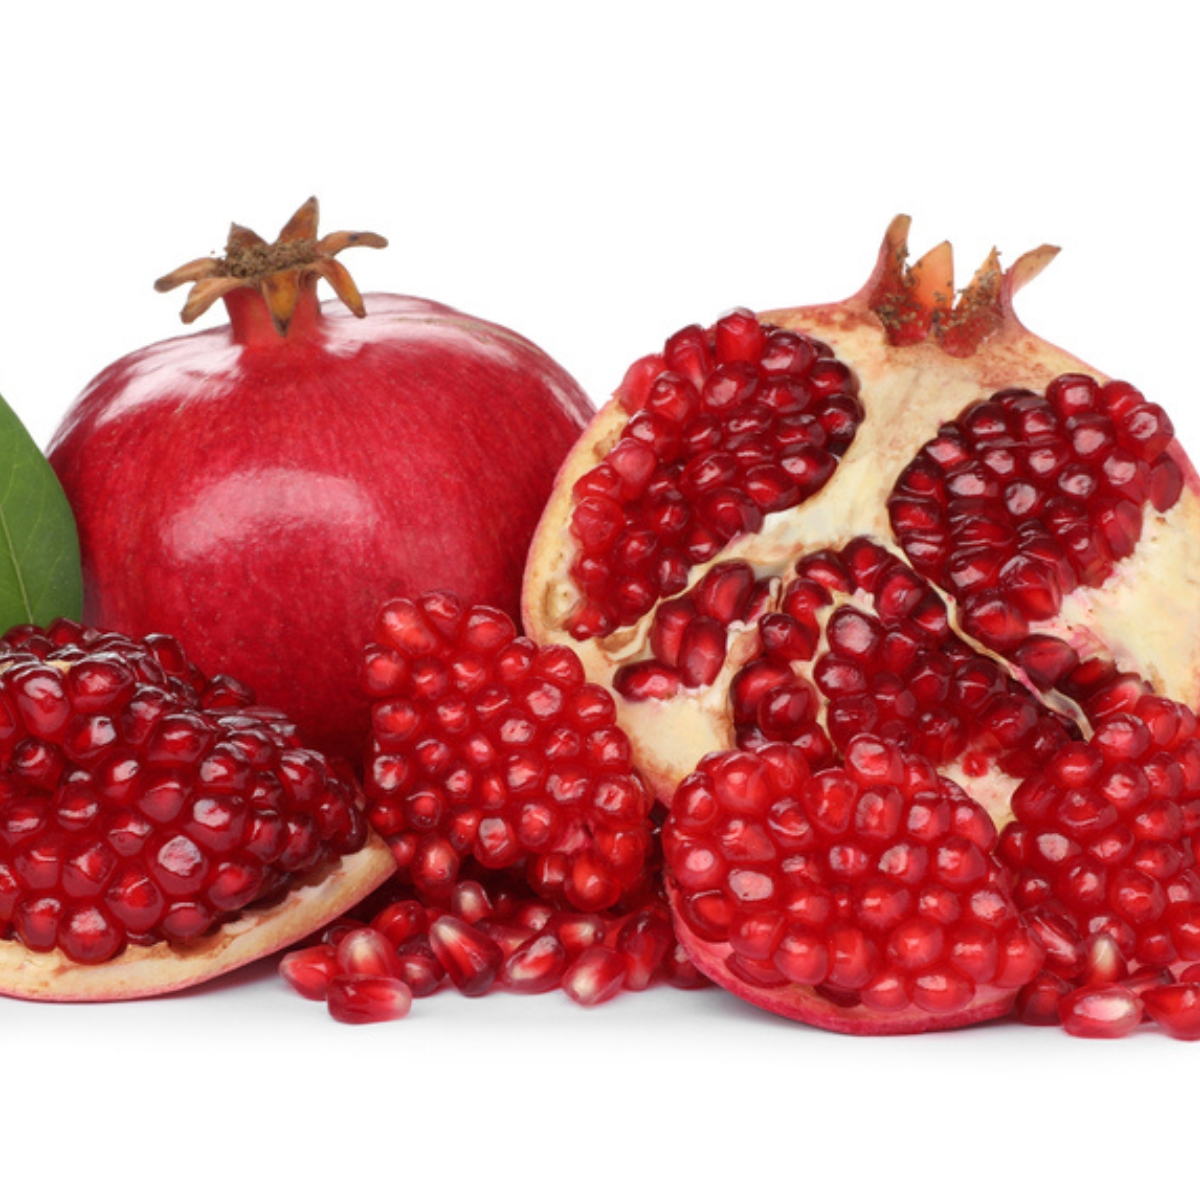 whole and cut pomegranates on white background for the post Pomegranates in the Bible, the significance of